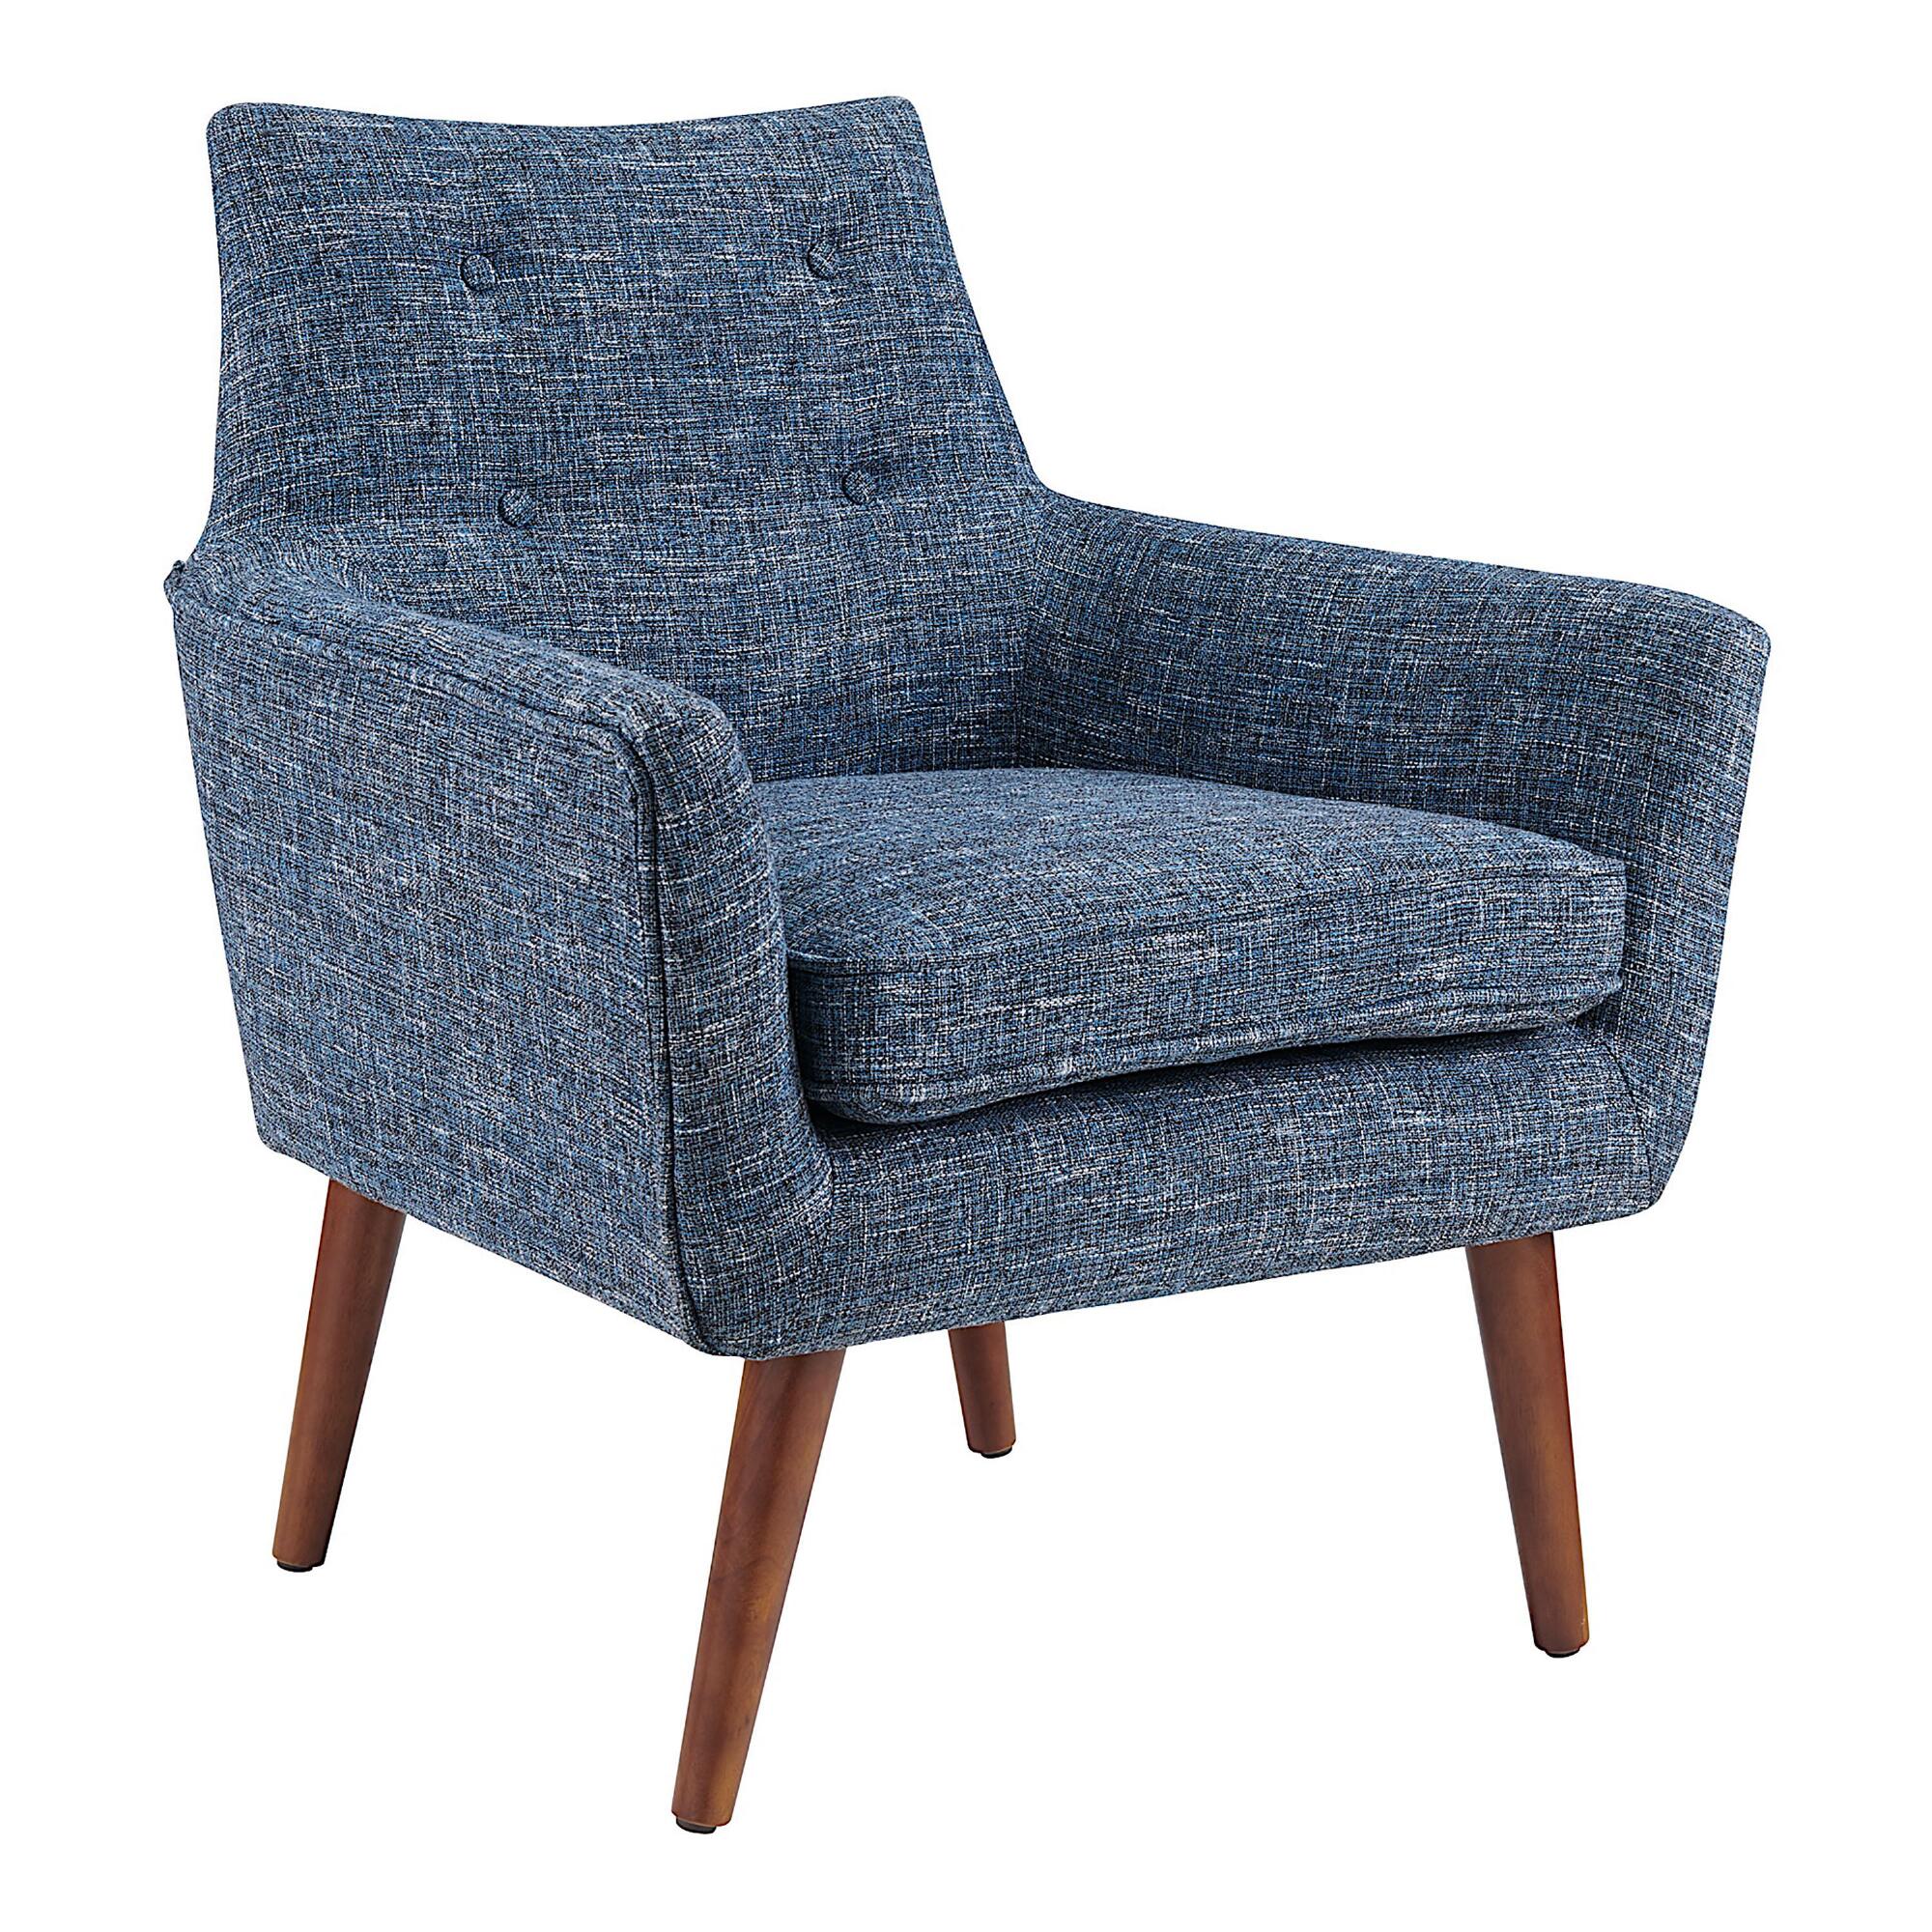 Tufted Thompson Upholstered Armchair: Blue by World Market